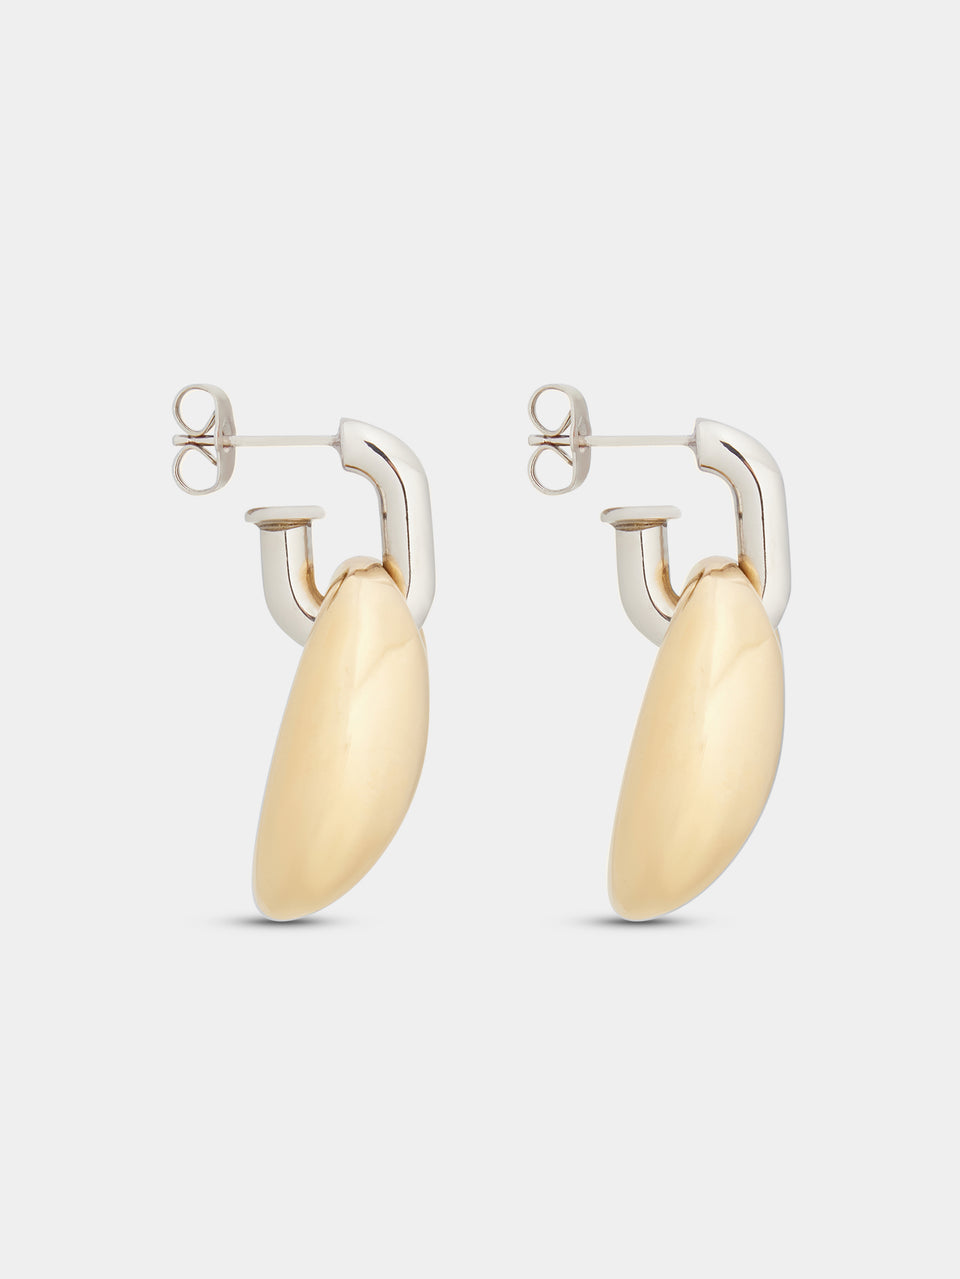 Eight Chunky Earrings in Silver and Gold